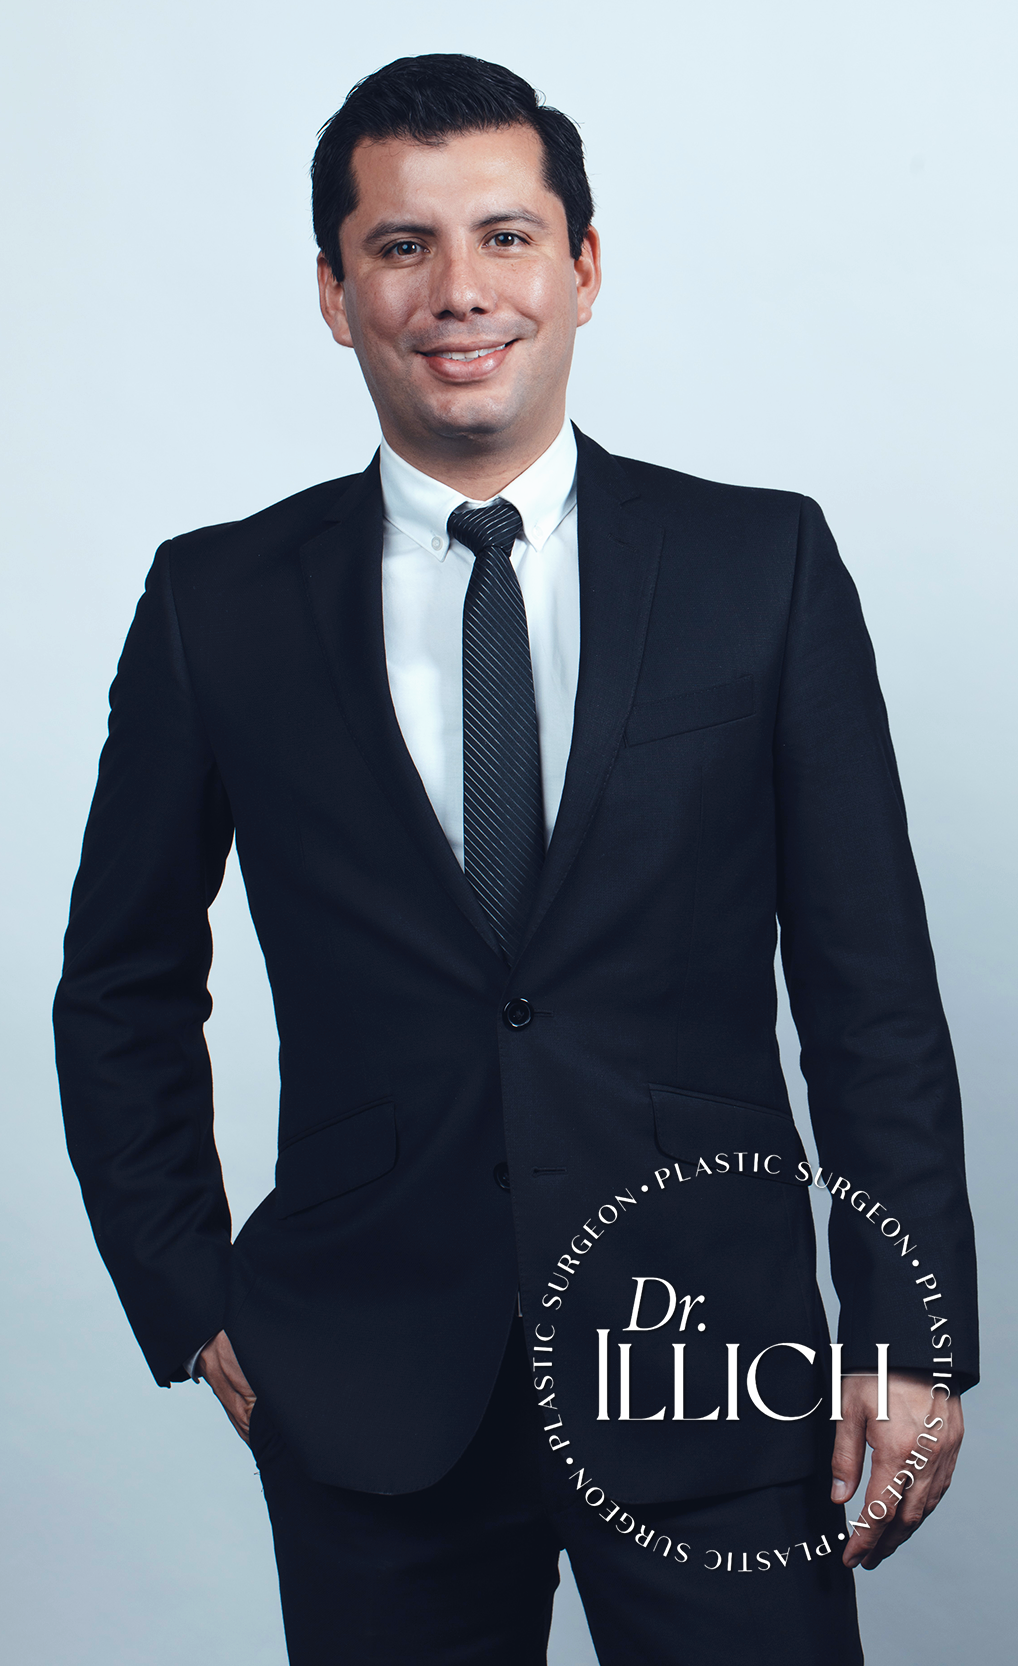 Dr. Carlos Illich Navarro offers world class plastic surgery including mommy makeover, breast augmentation, tummy tuck and liposuction at his practice Mommy Makeover Tijuana in Tijuana, Mexico.